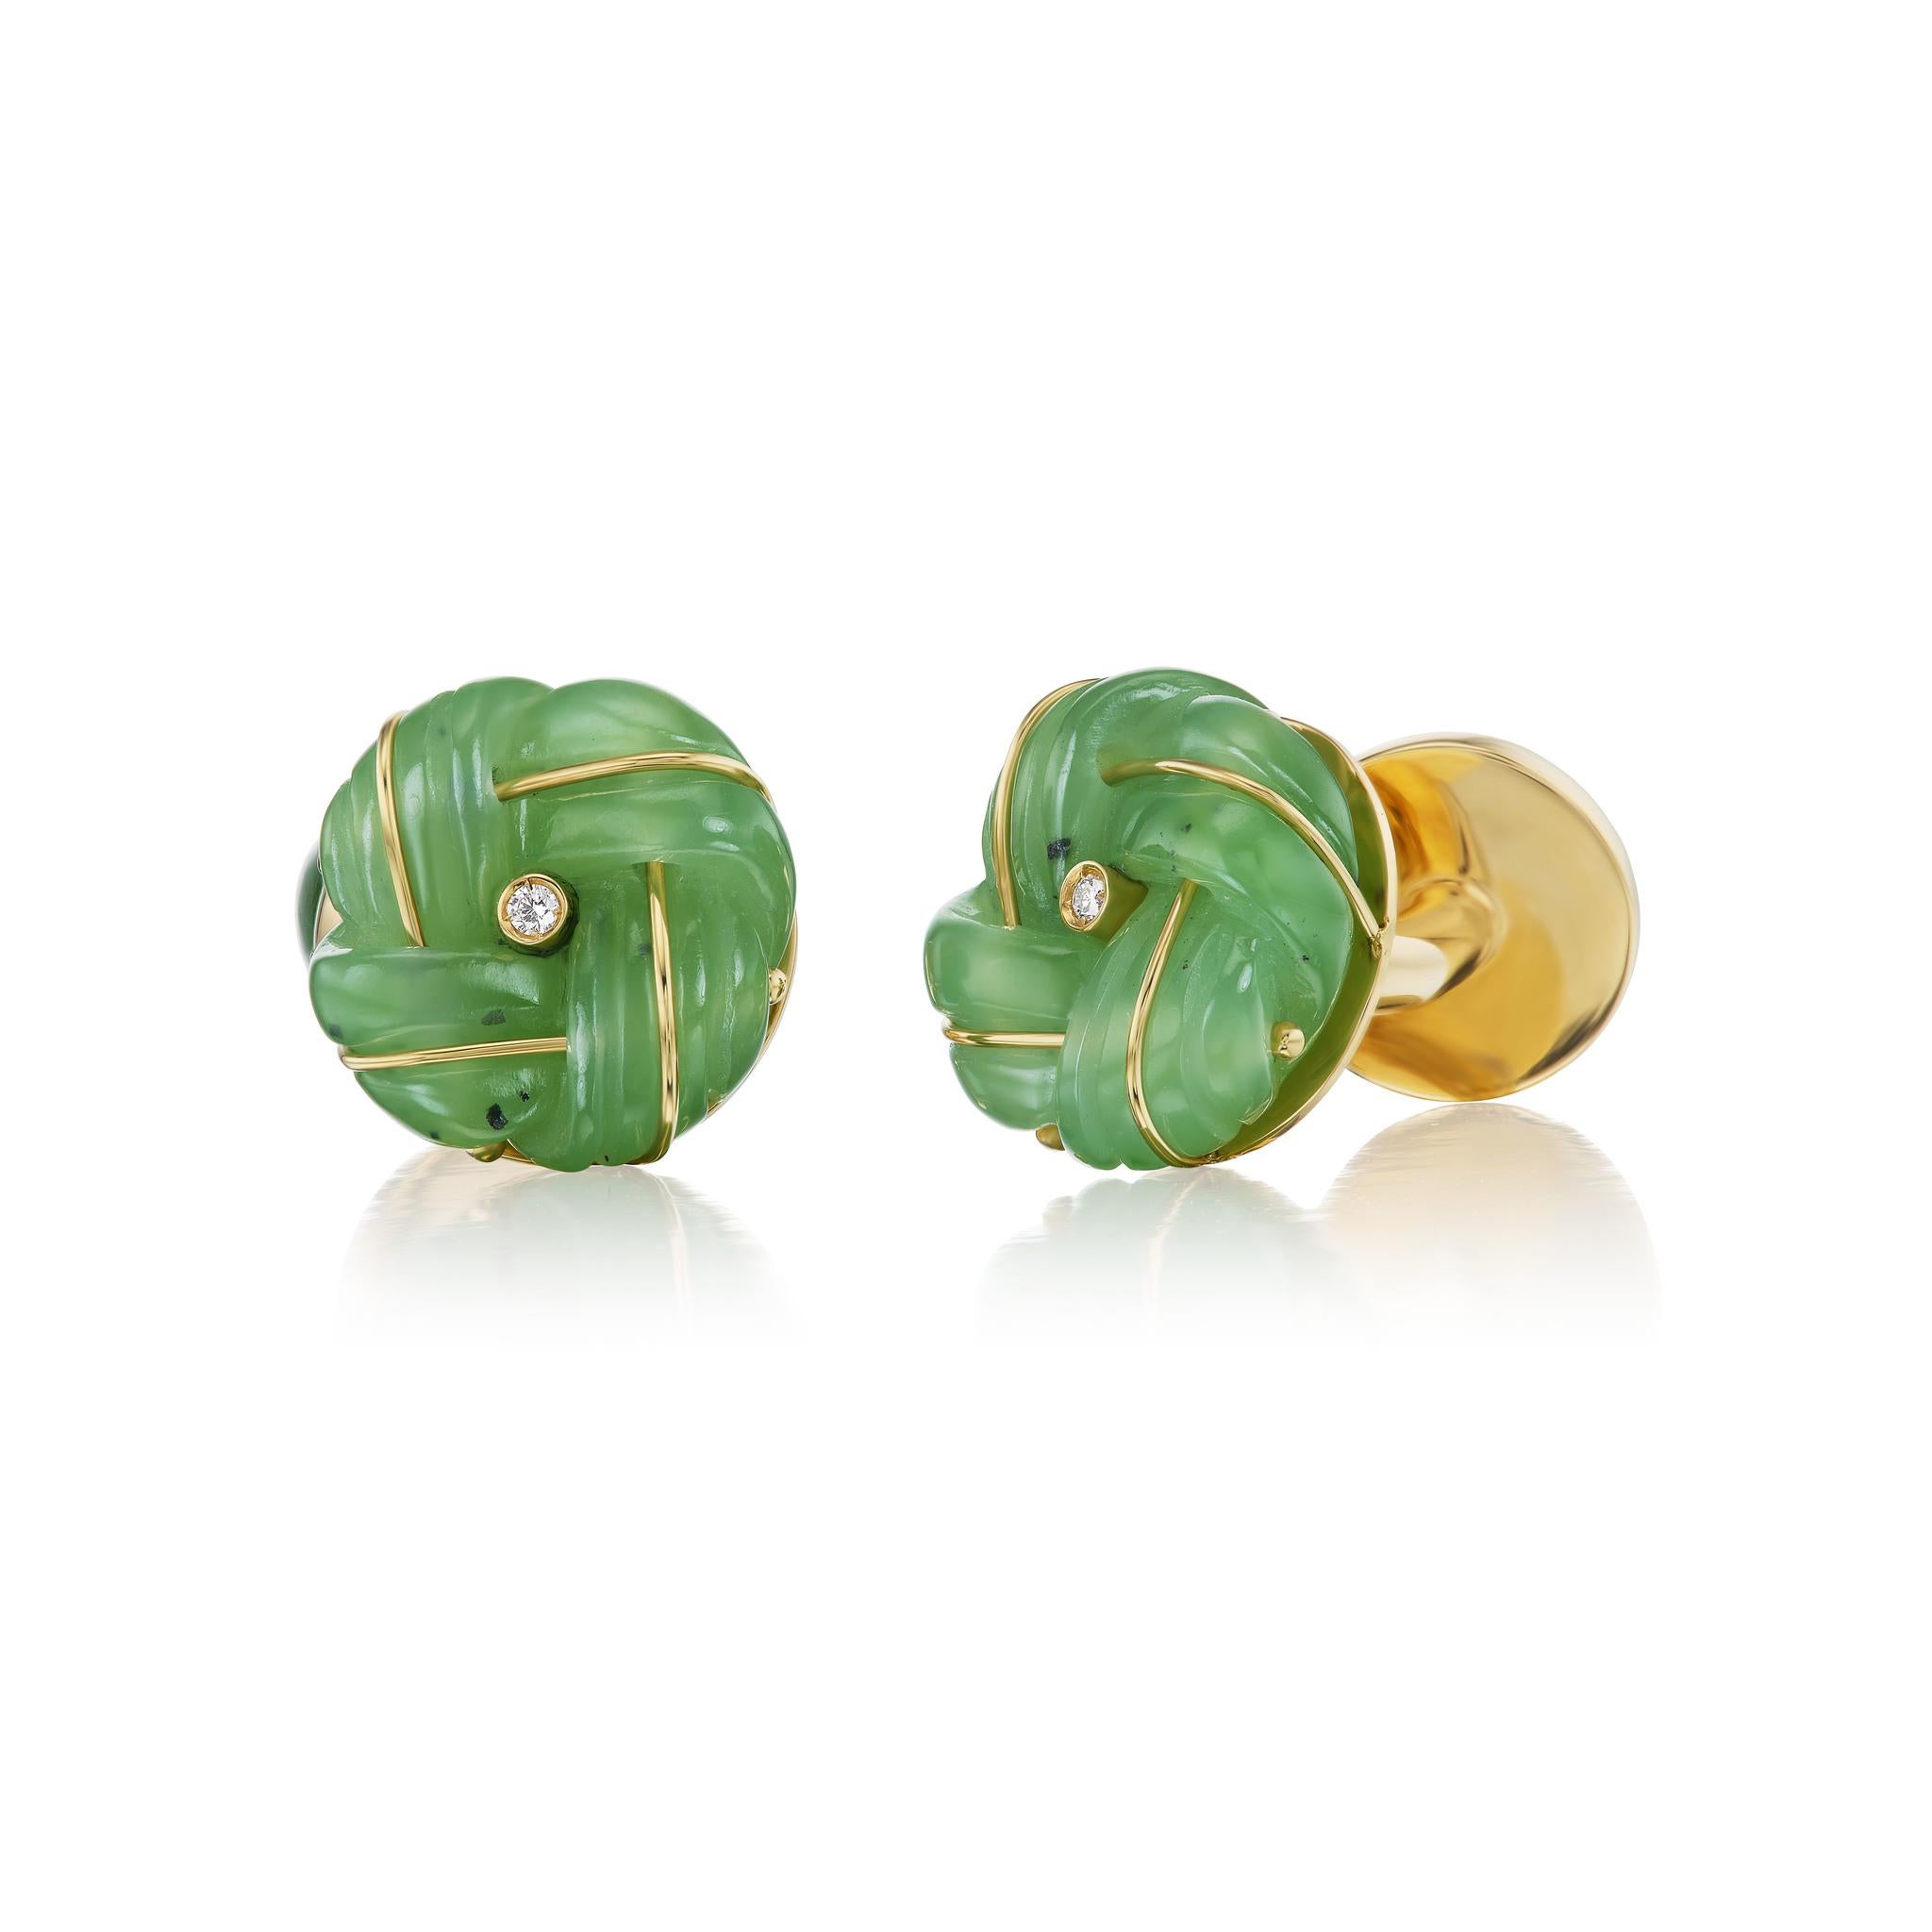 The classic knot cufflink, reinterpreted in carved jade and discretely embellished with gold and diamonds.  

Knot cufflinks date back to the early 20th century and the originals were made of silk by the French shirt maker Charvet.  Since then,